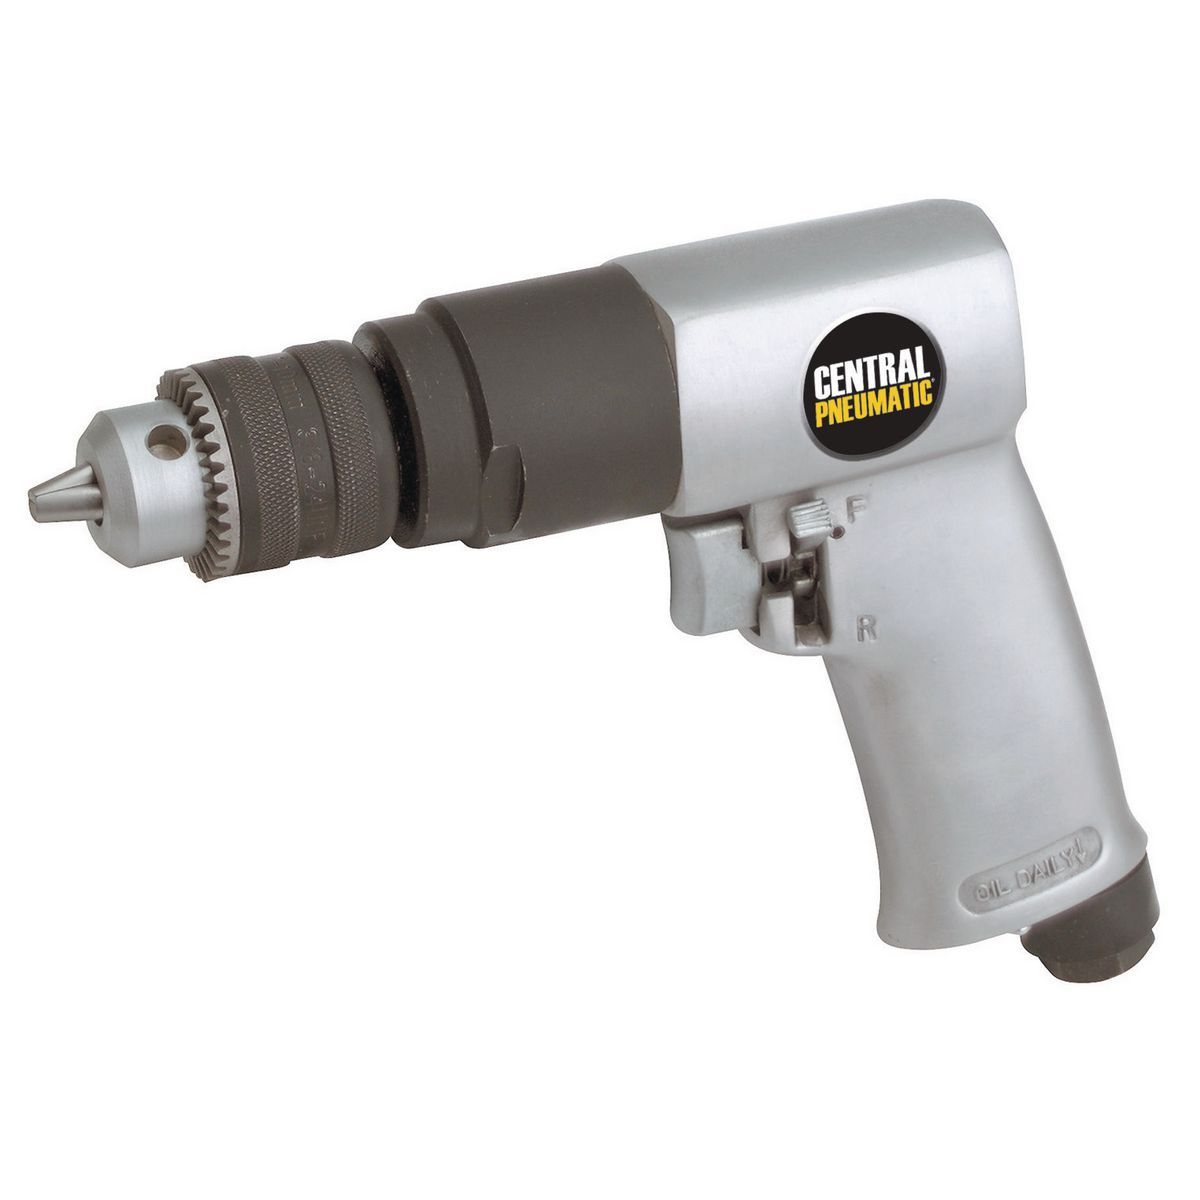 CENTRAL PNEUMATIC 3/8" Reversible Air Drill With Keyed Chuck and Key